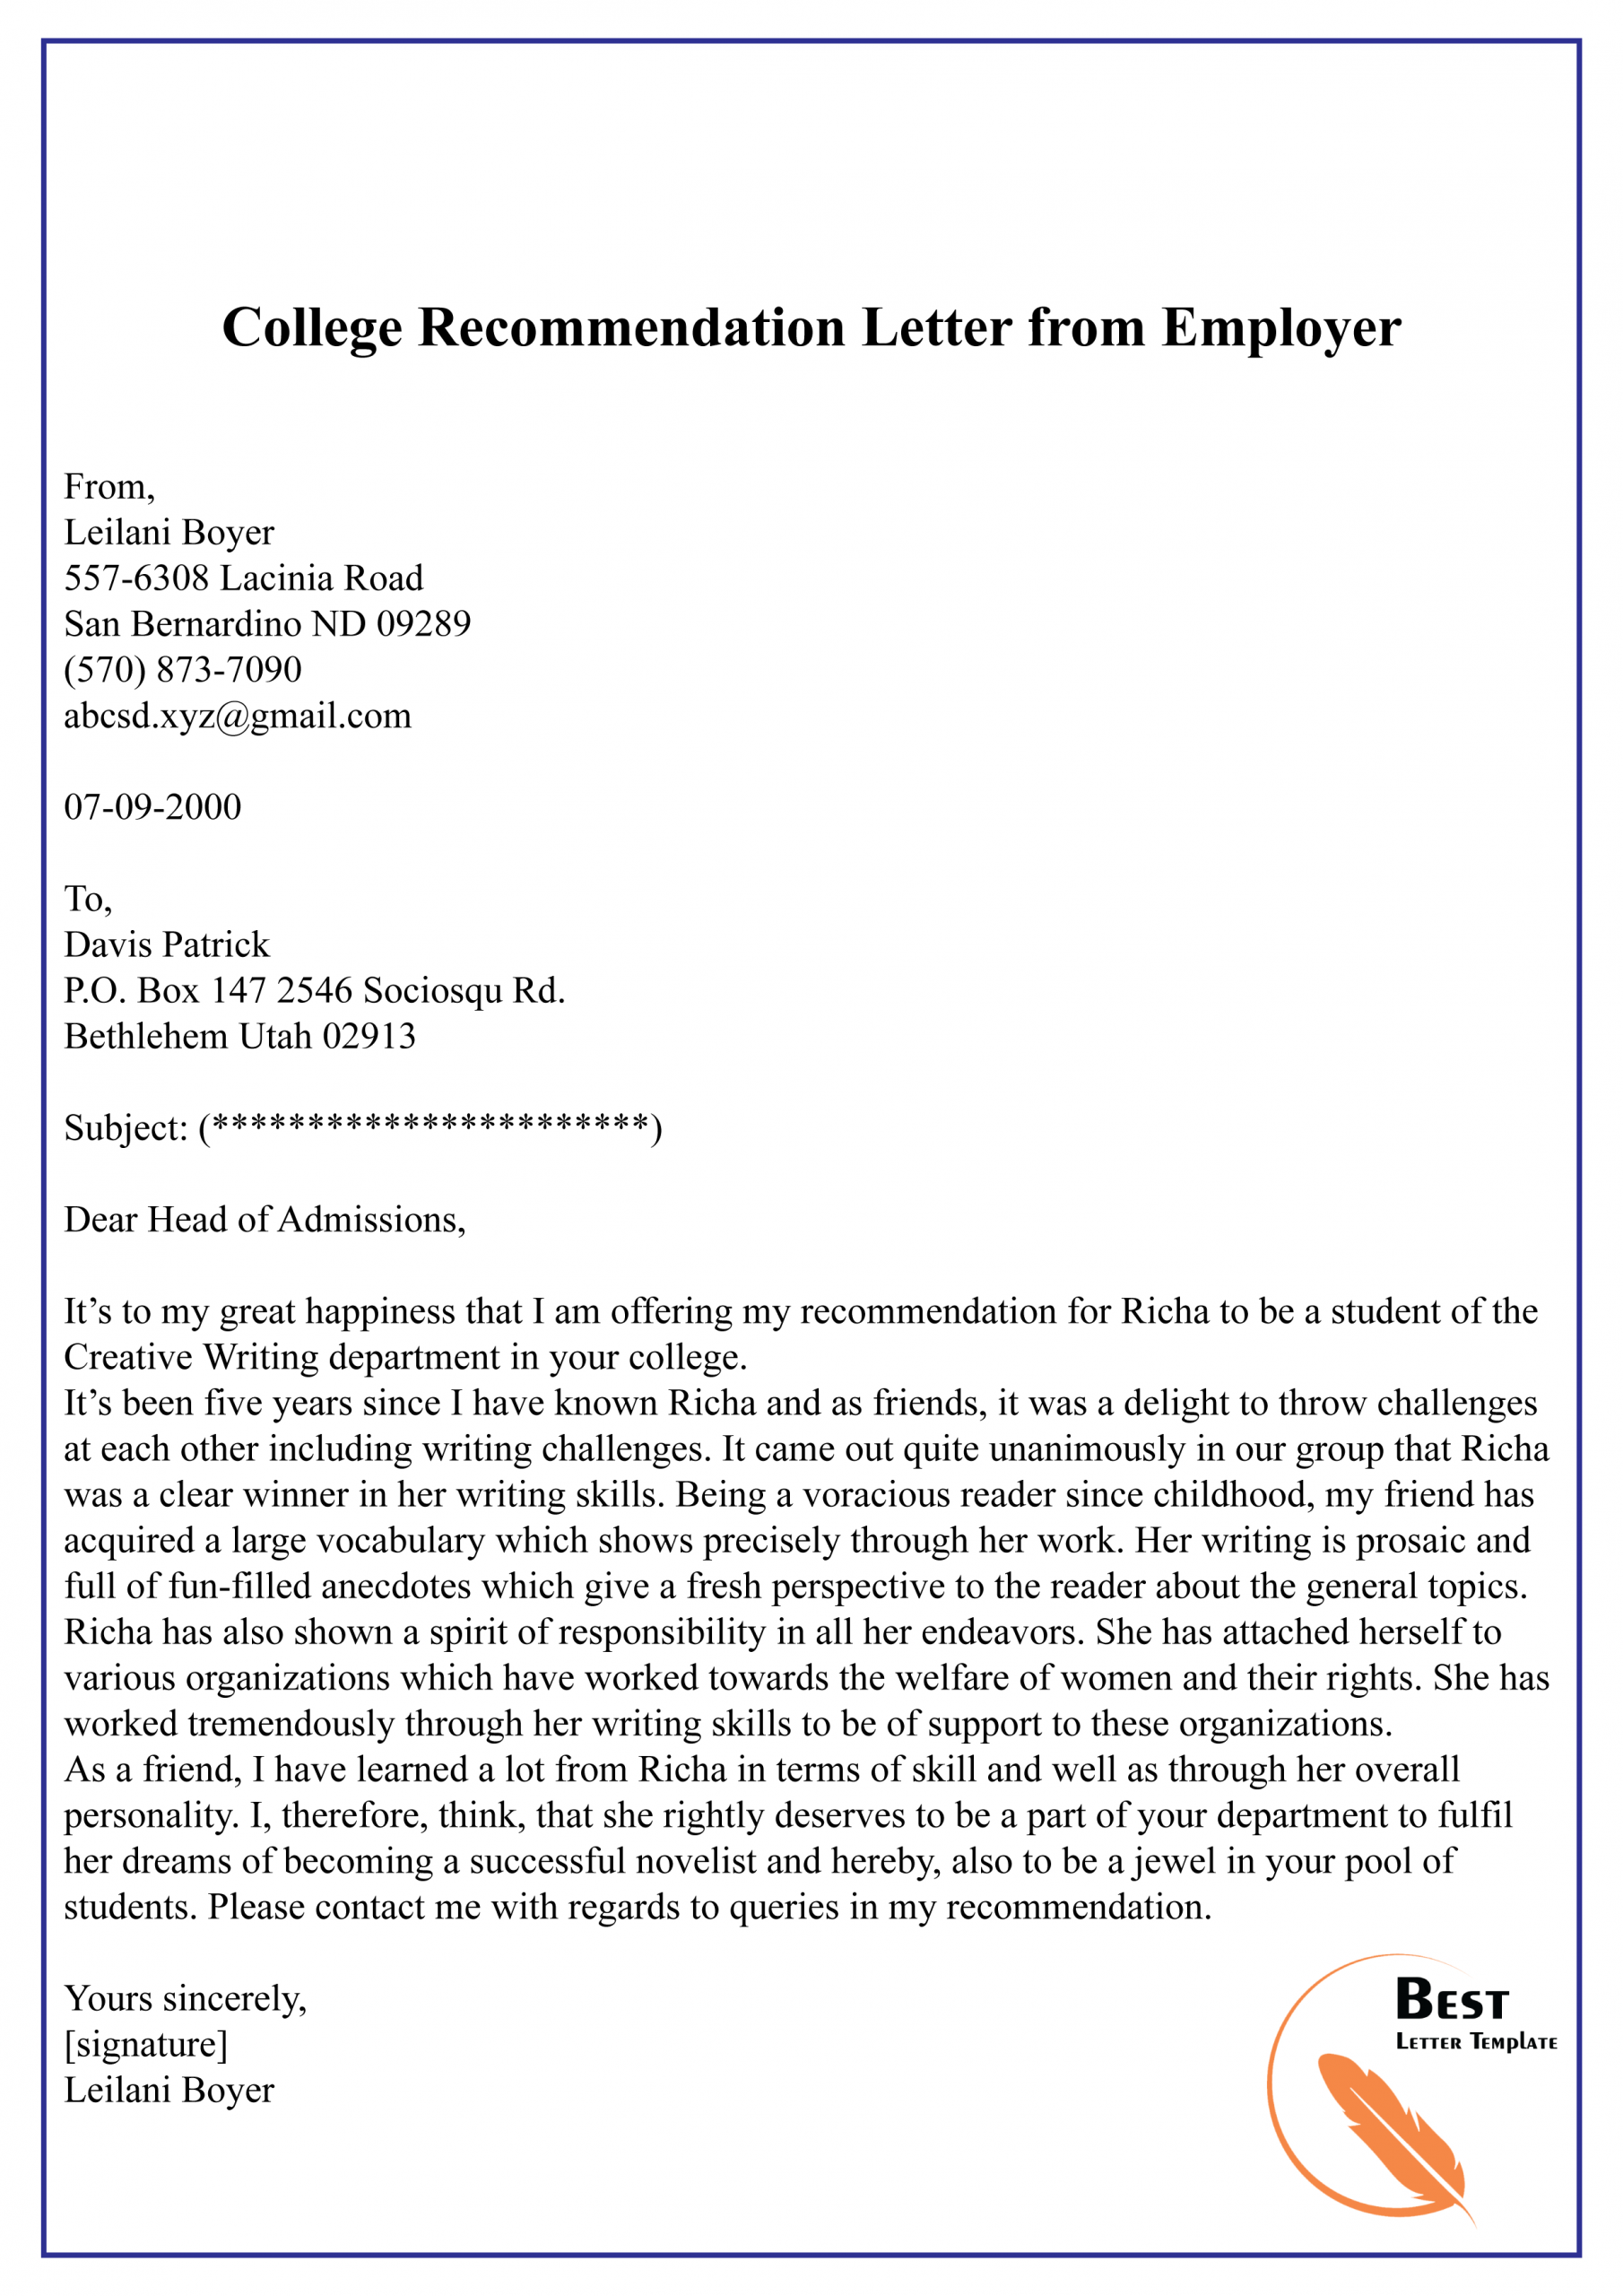 College Recommendation Letter From Employer 01 Best Letter regarding measurements 2480 X 3508